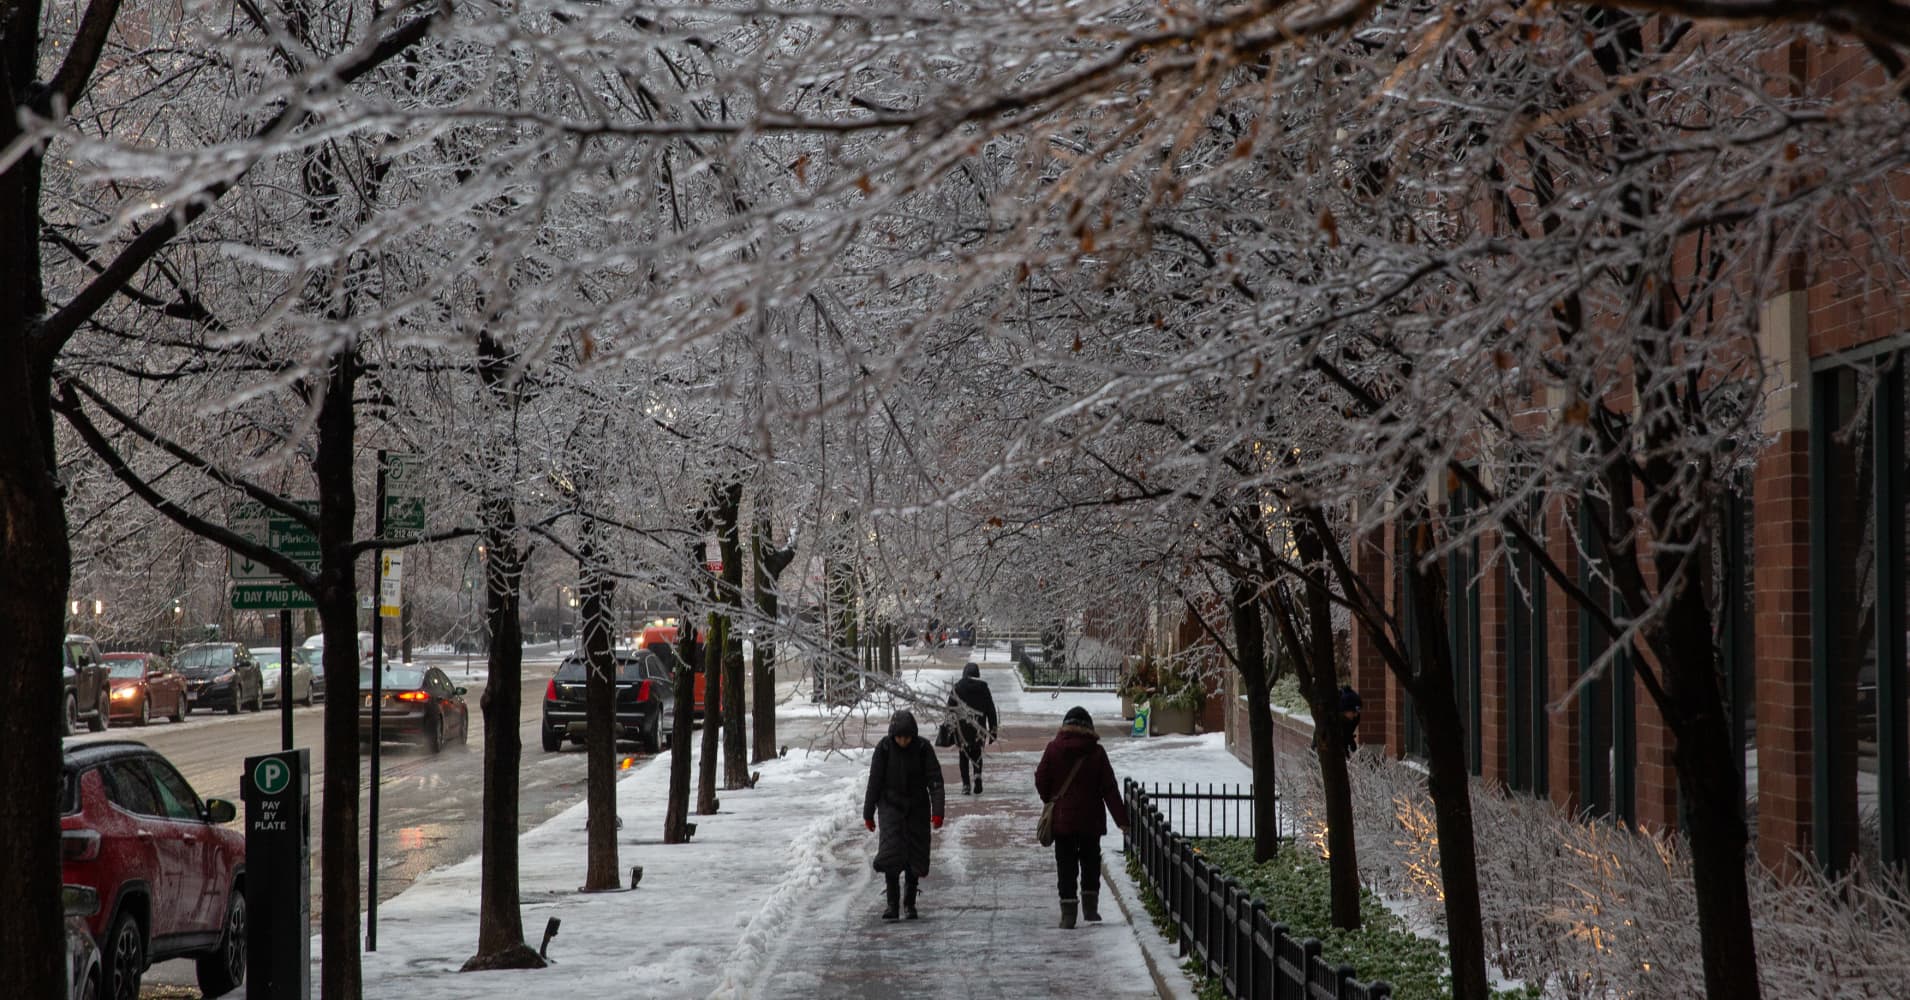 Massive winter storm expected to dump rain, ice, snow on much of US